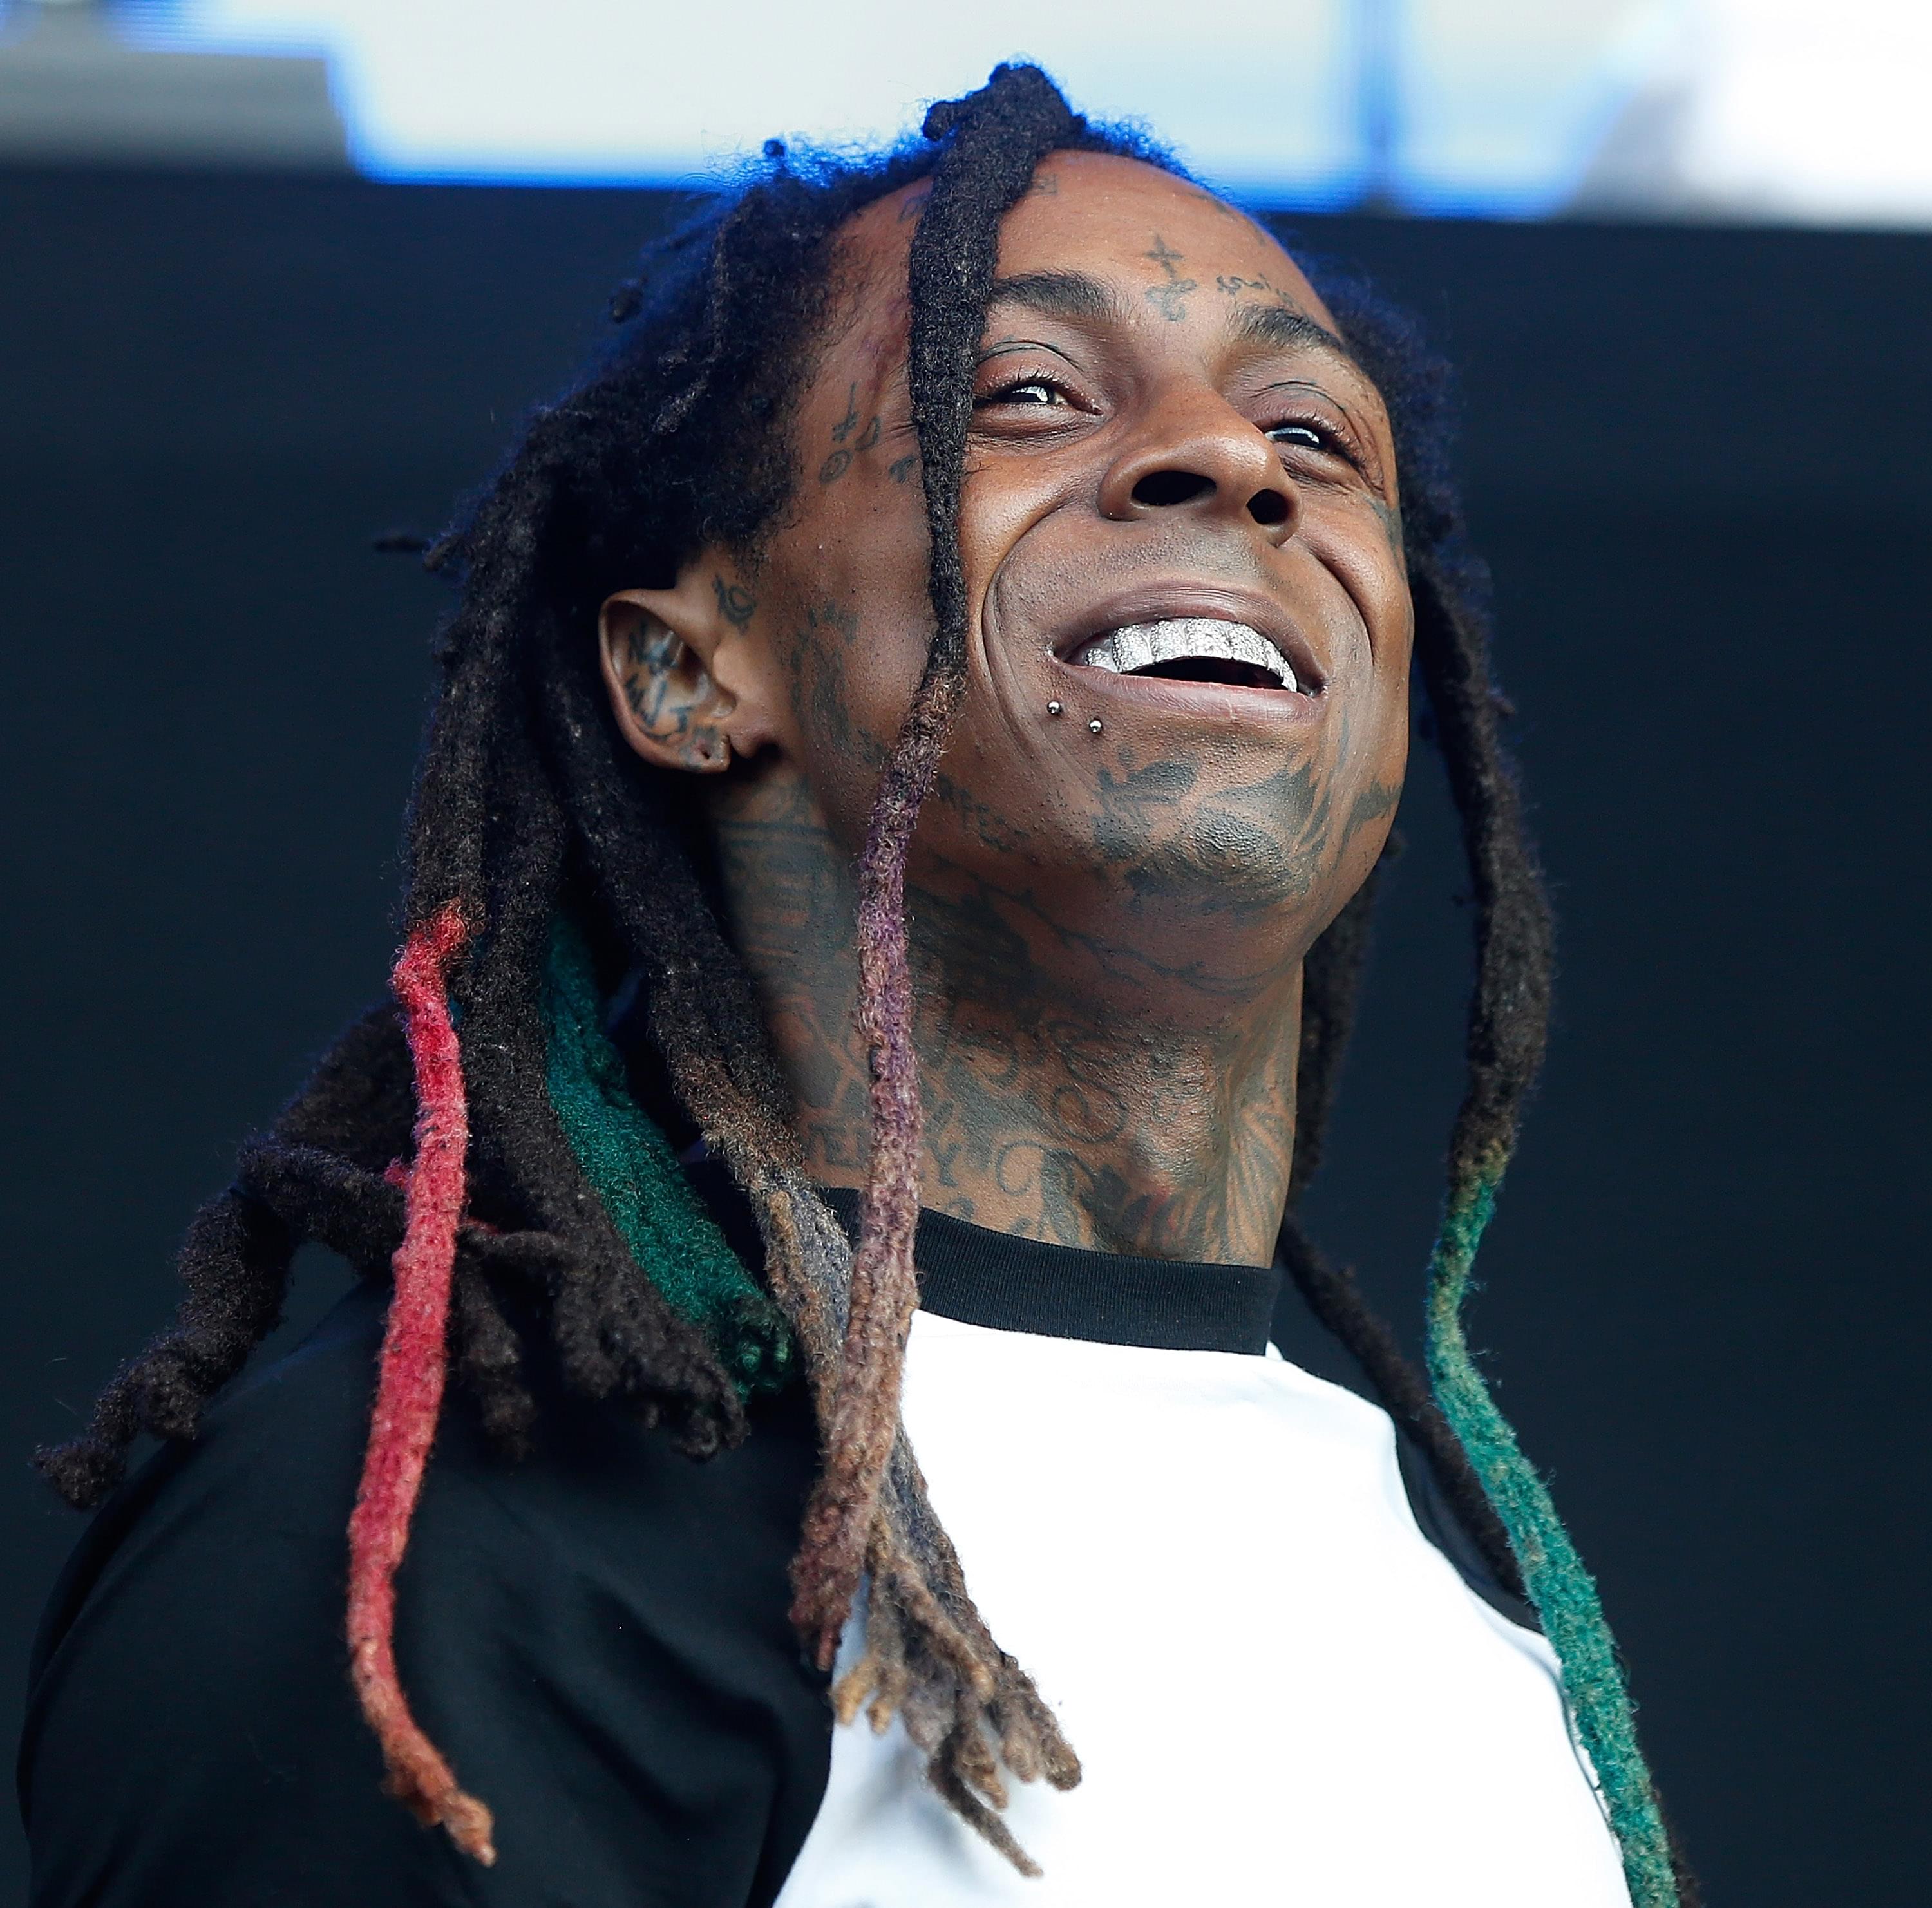 Lil Wayne Ends Up In The Hospital After A Seizure